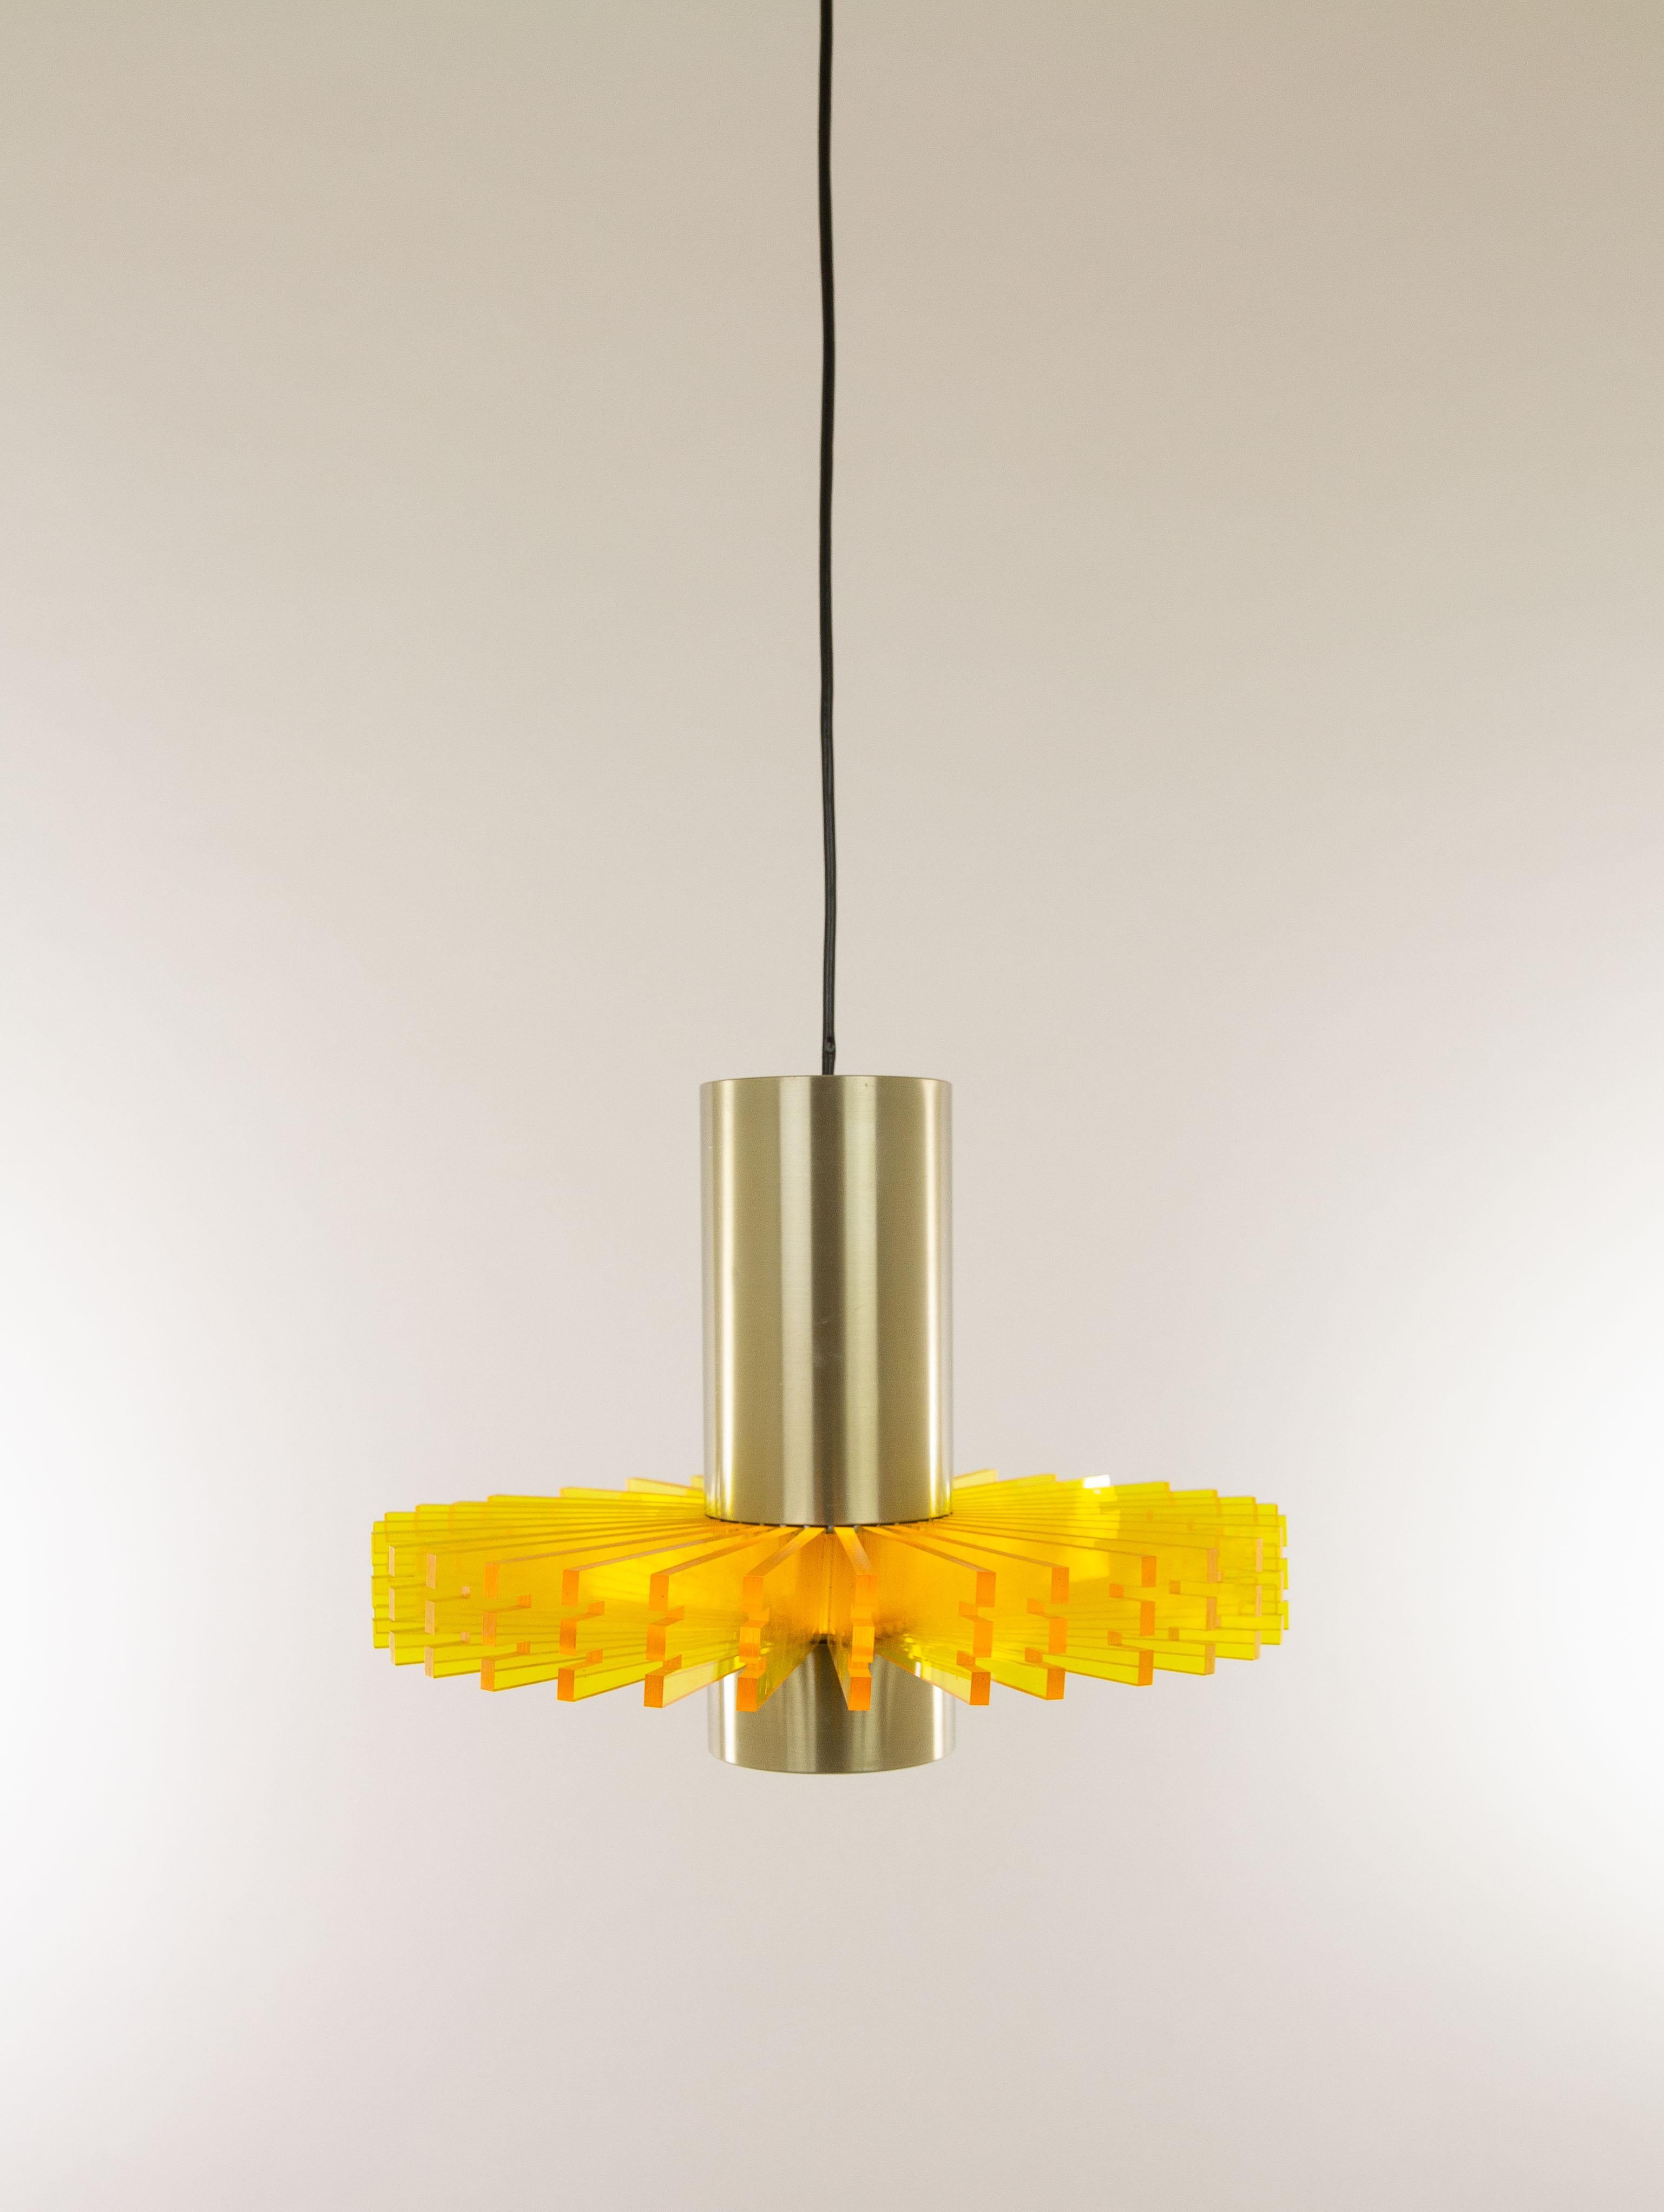 Yellow 'Priest Collar' Pendant by Claus Bolby for Cebo Industri, 1960s (Moderne der Mitte des Jahrhunderts)